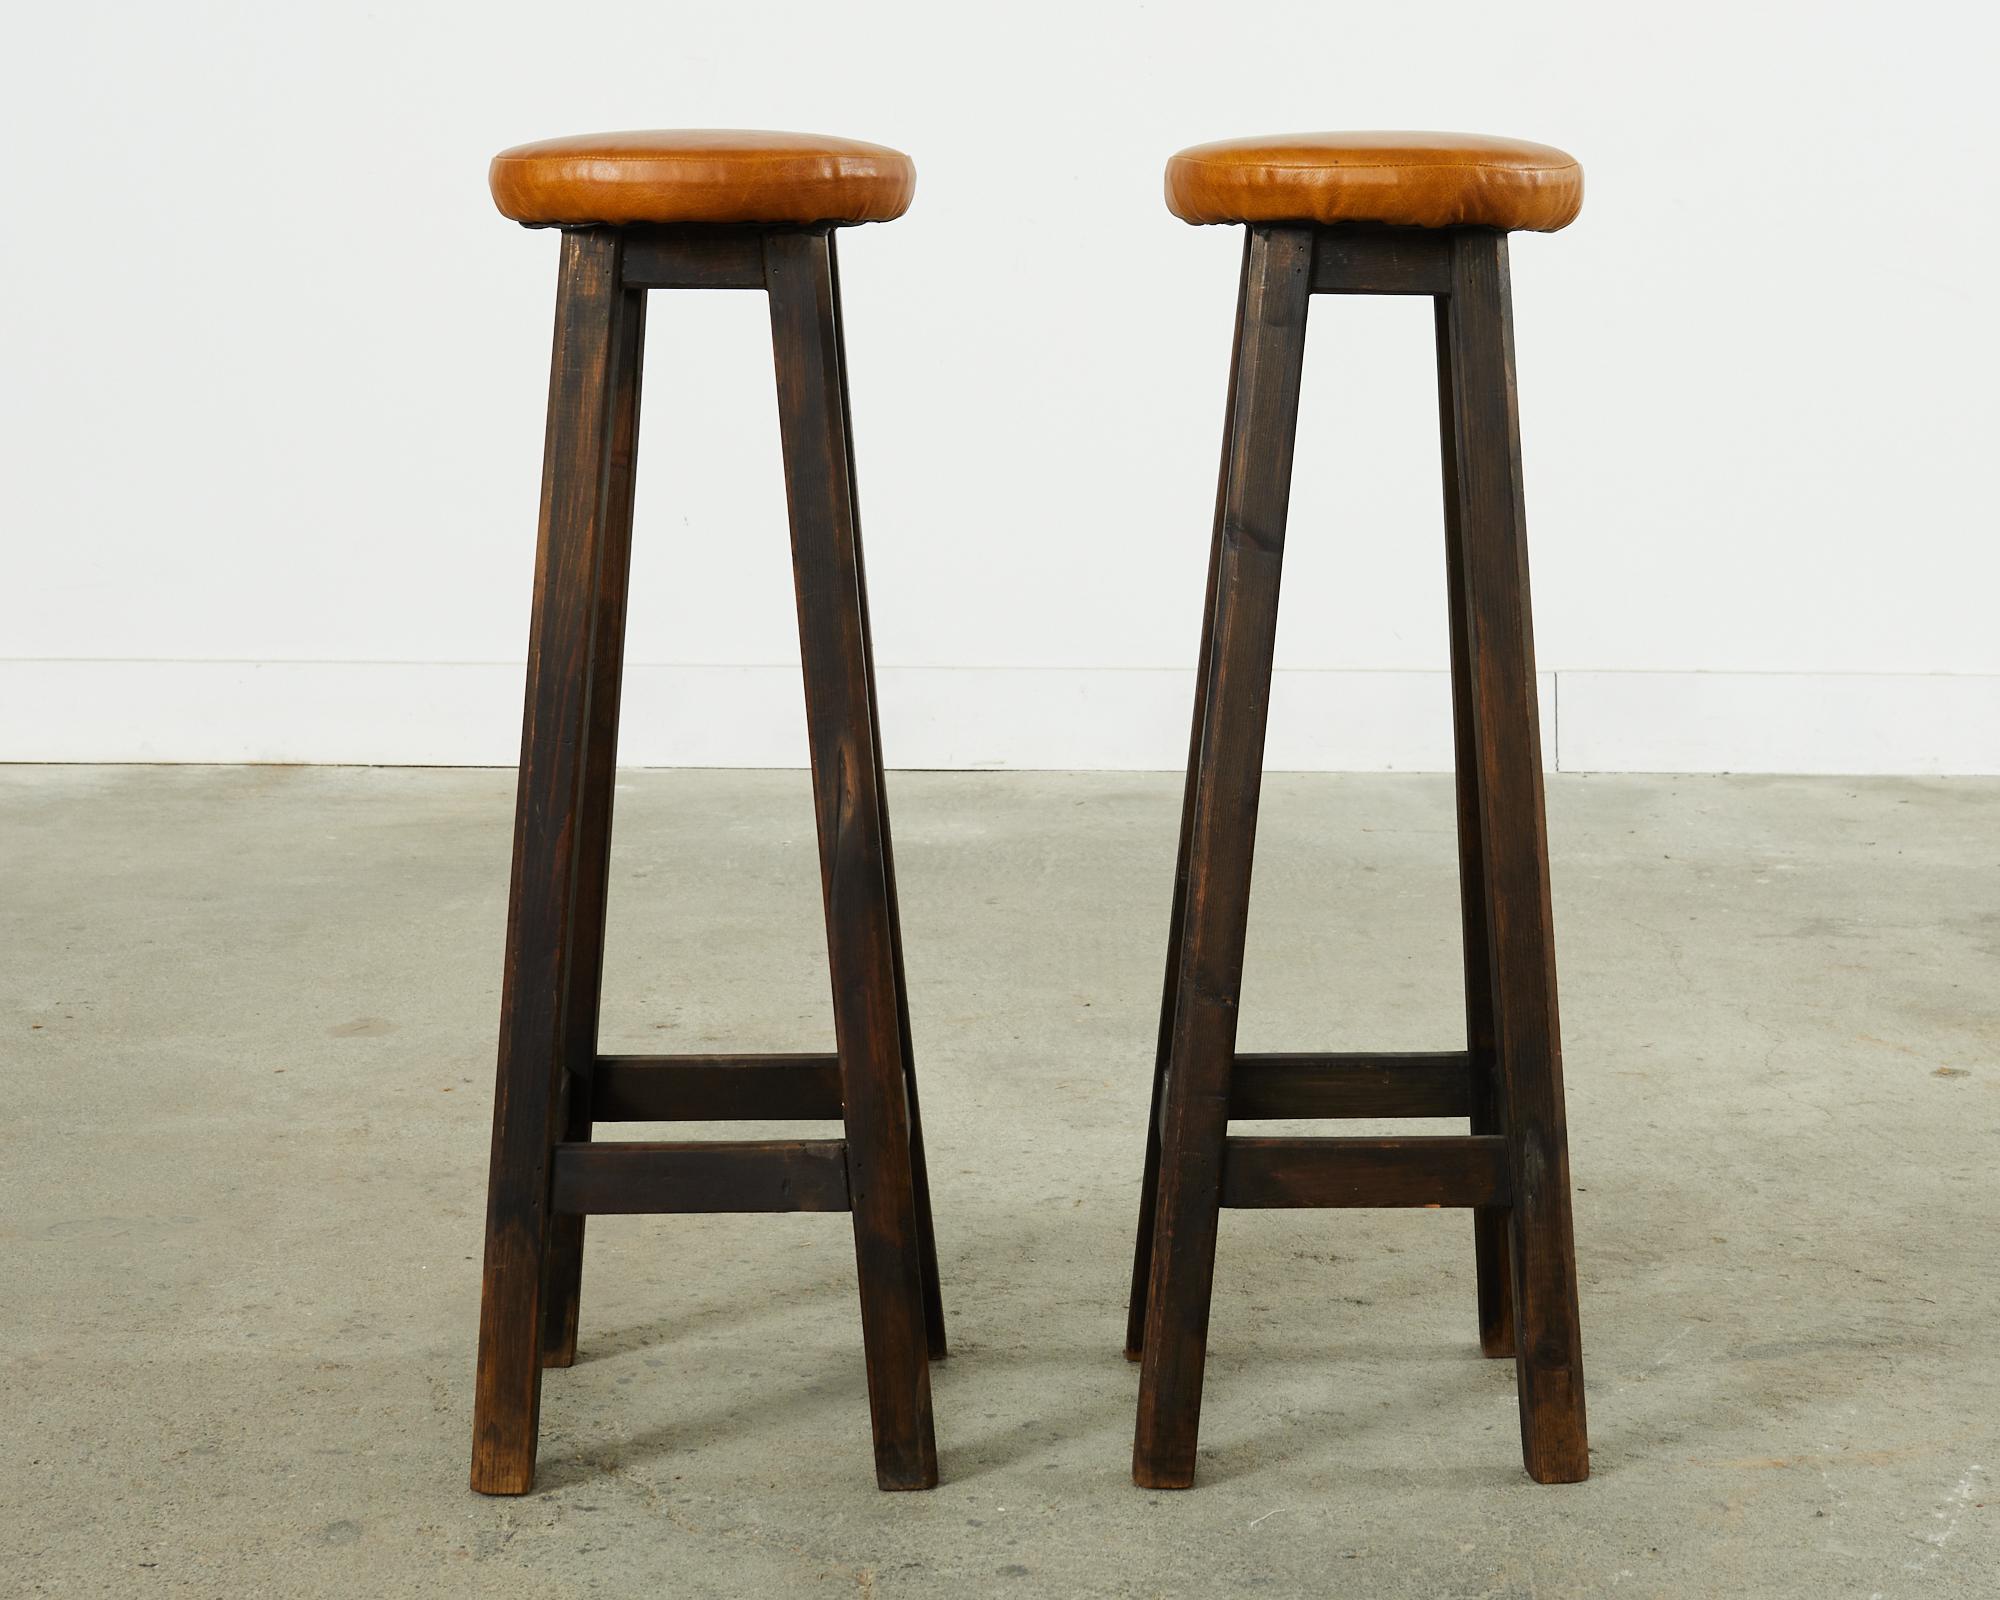 Set of Six Tall Matching Oak Pub Bar Stools In Good Condition For Sale In Rio Vista, CA